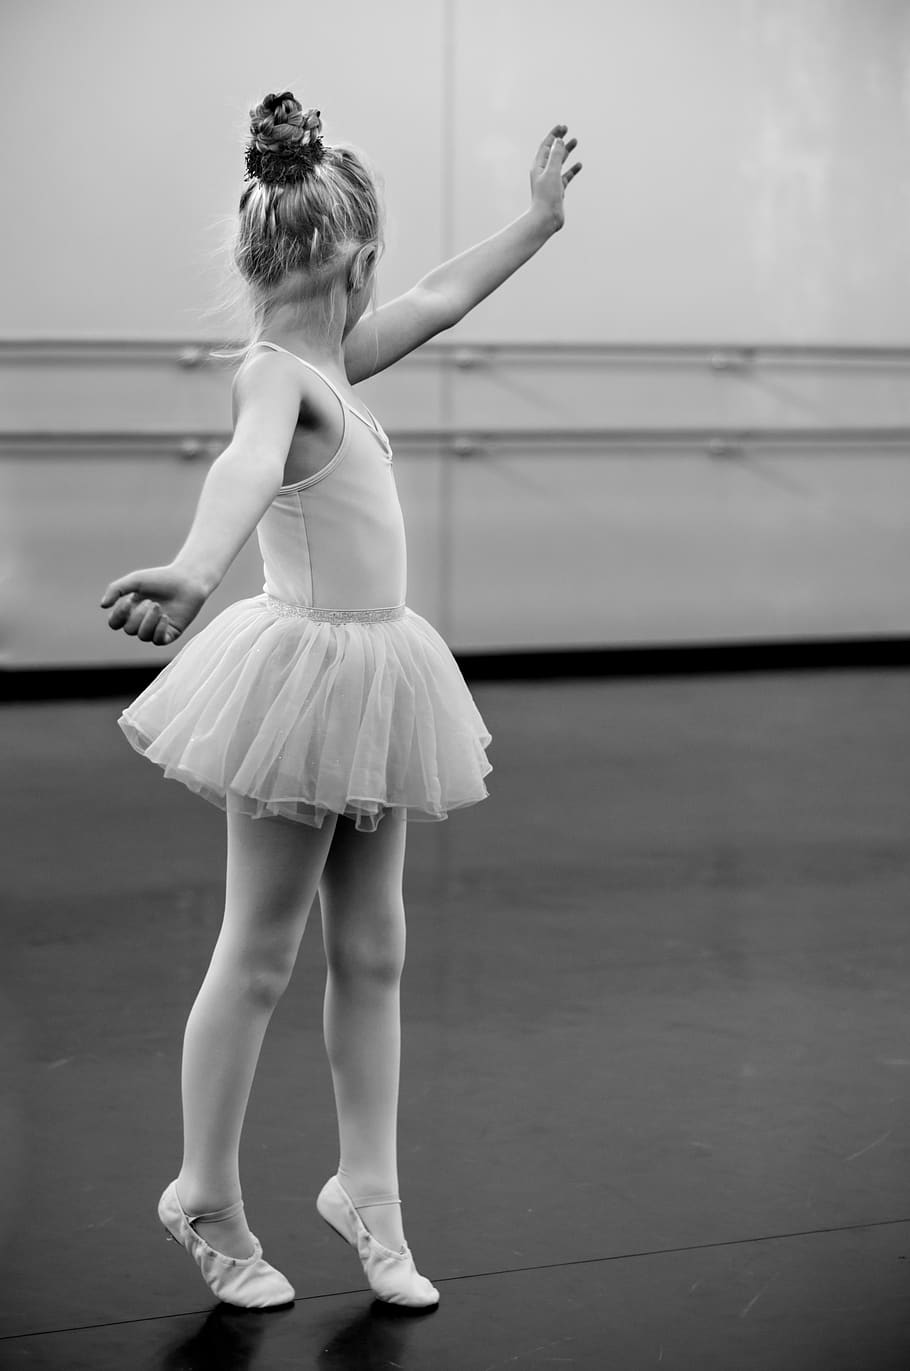 Grayscale Photography of Girl Doing Ballet, athlete, balance